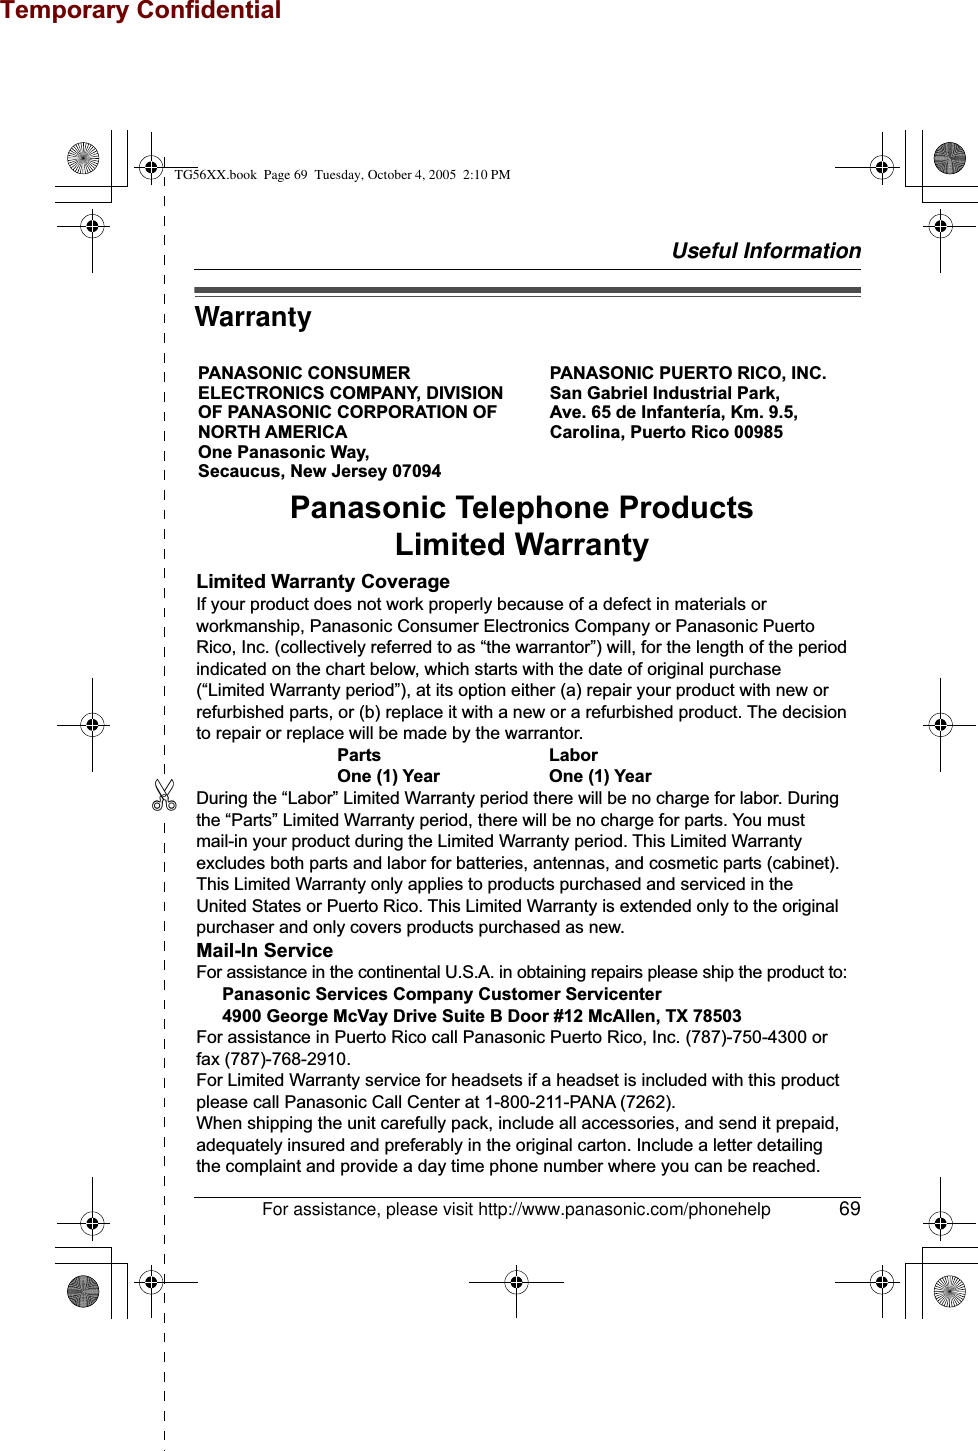 Temporary ConfidentialUseful Information✄For assistance, please visit http://www.panasonic.com/phonehelp 69WarrantyPANASONIC CONSUMER ELECTRONICS COMPANY, DIVISION OF PANASONIC CORPORATION OF NORTH AMERICA One Panasonic Way, Secaucus, New Jersey 07094PANASONIC PUERTO RICO, INC.San Gabriel Industrial Park, Ave. 65 de Infantería, Km. 9.5,Carolina, Puerto Rico 00985Panasonic Telephone ProductsLimited WarrantyLimited Warranty CoverageIf your product does not work properly because of a defect in materials or workmanship, Panasonic Consumer Electronics Company or Panasonic Puerto Rico, Inc. (collectively referred to as “the warrantor”) will, for the length of the period indicated on the chart below, which starts with the date of original purchase (“Limited Warranty period”), at its option either (a) repair your product with new or refurbished parts, or (b) replace it with a new or a refurbished product. The decision to repair or replace will be made by the warrantor.     Parts       Labor     One (1) Year    One (1) YearDuring the “Labor” Limited Warranty period there will be no charge for labor. During the “Parts” Limited Warranty period, there will be no charge for parts. You must mail-in your product during the Limited Warranty period. This Limited Warranty excludes both parts and labor for batteries, antennas, and cosmetic parts (cabinet). This Limited Warranty only applies to products purchased and serviced in the United States or Puerto Rico. This Limited Warranty is extended only to the original purchaser and only covers products purchased as new.Mail-In ServiceFor assistance in the continental U.S.A. in obtaining repairs please ship the product to:  Panasonic Services Company Customer Servicenter  4900 George McVay Drive Suite B Door #12 McAllen, TX 78503For assistance in Puerto Rico call Panasonic Puerto Rico, Inc. (787)-750-4300 or fax (787)-768-2910.For Limited Warranty service for headsets if a headset is included with this product please call Panasonic Call Center at 1-800-211-PANA (7262).When shipping the unit carefully pack, include all accessories, and send it prepaid, adequately insured and preferably in the original carton. Include a letter detailing the complaint and provide a day time phone number where you can be reached.TG56XX.book  Page 69  Tuesday, October 4, 2005  2:10 PM